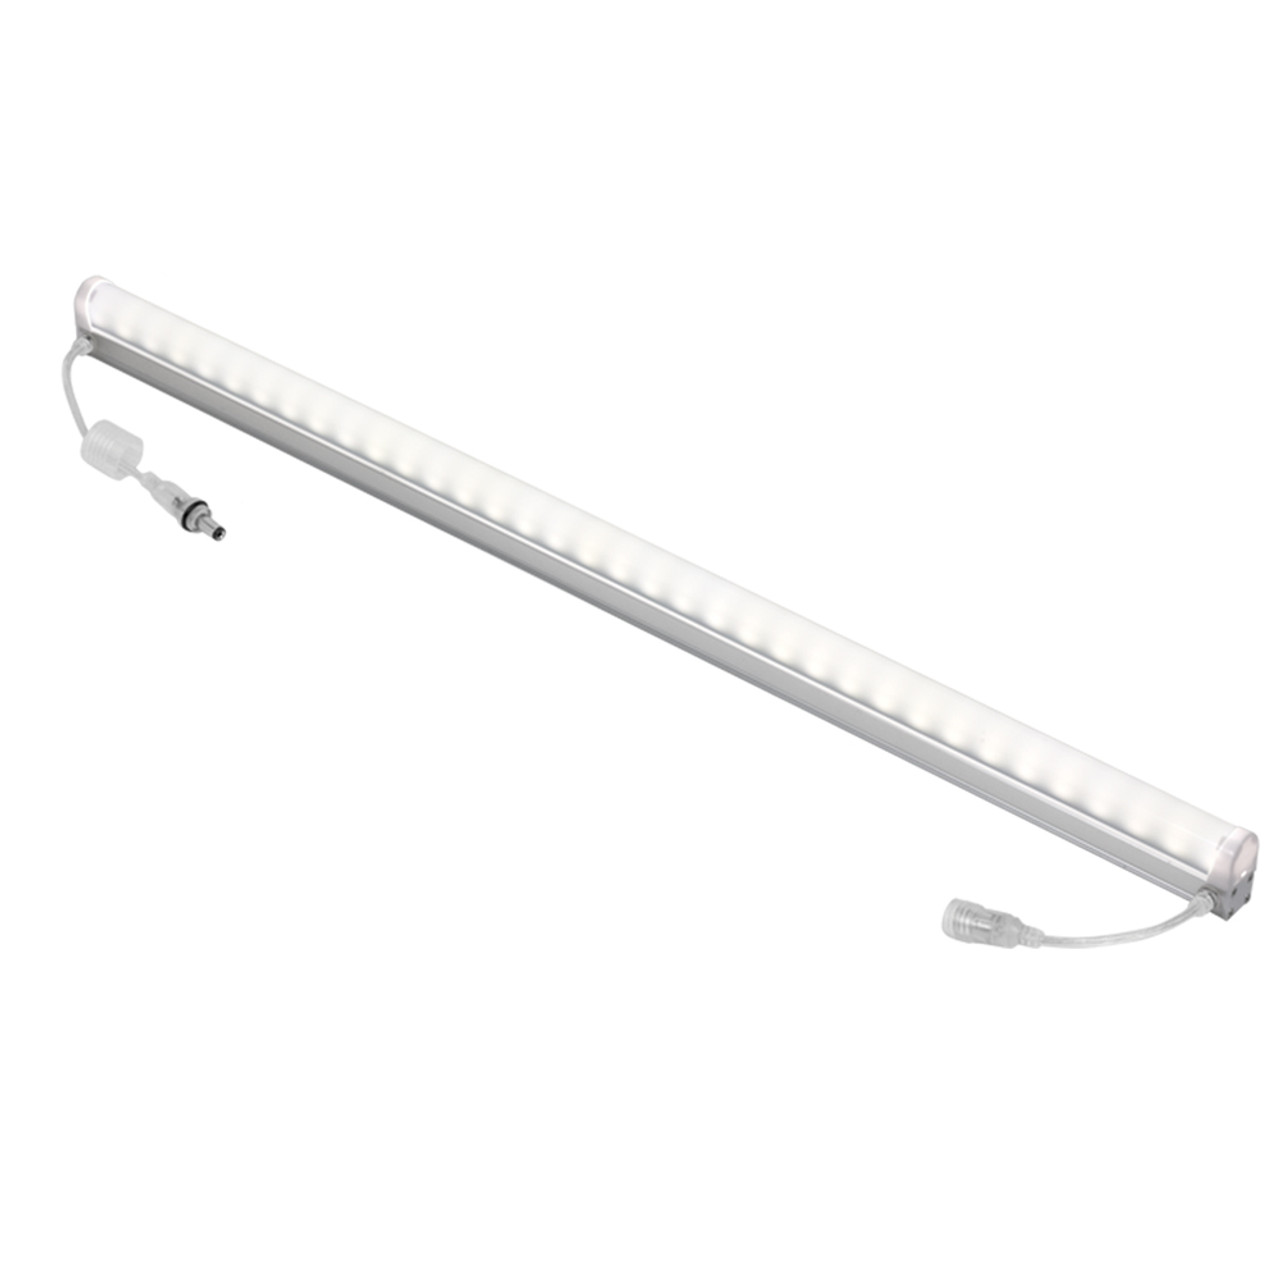 JESCO Lighting DL-RS-48-60-C 12.8W Dimmable linear LED fixture for wet,damp and dry locations. Aluminium extruded housing. Opal Cover is optional., 6200K-6400K